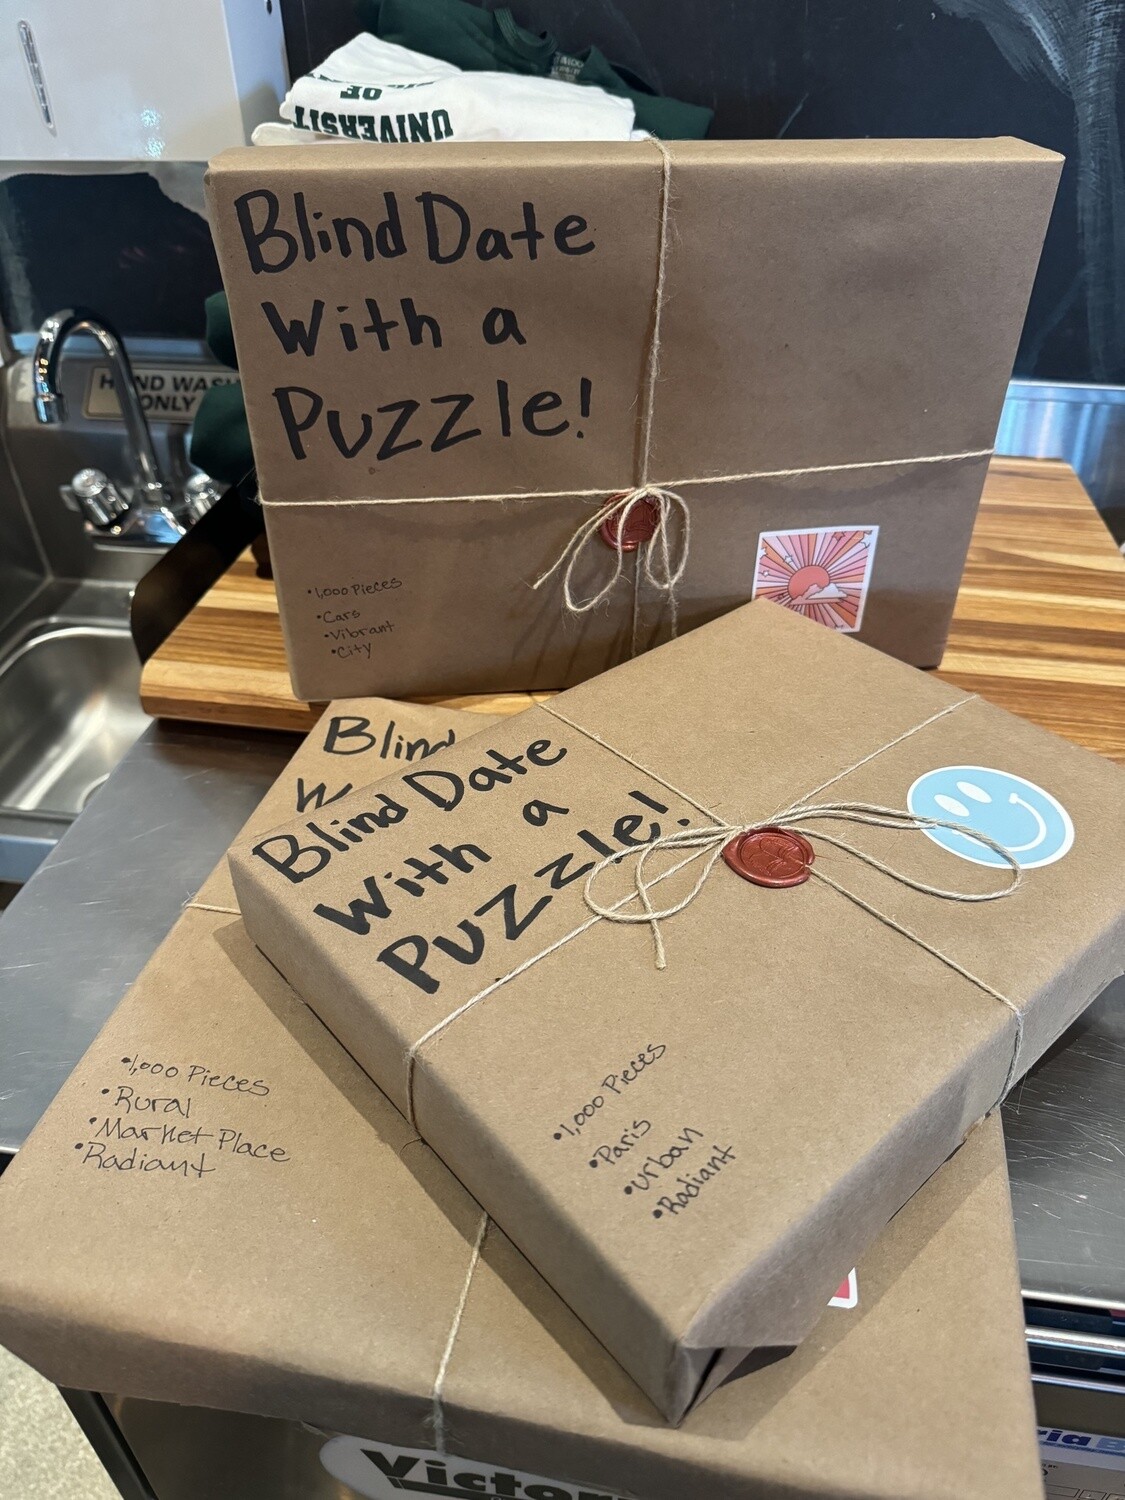 Blind Date with a Puzzle